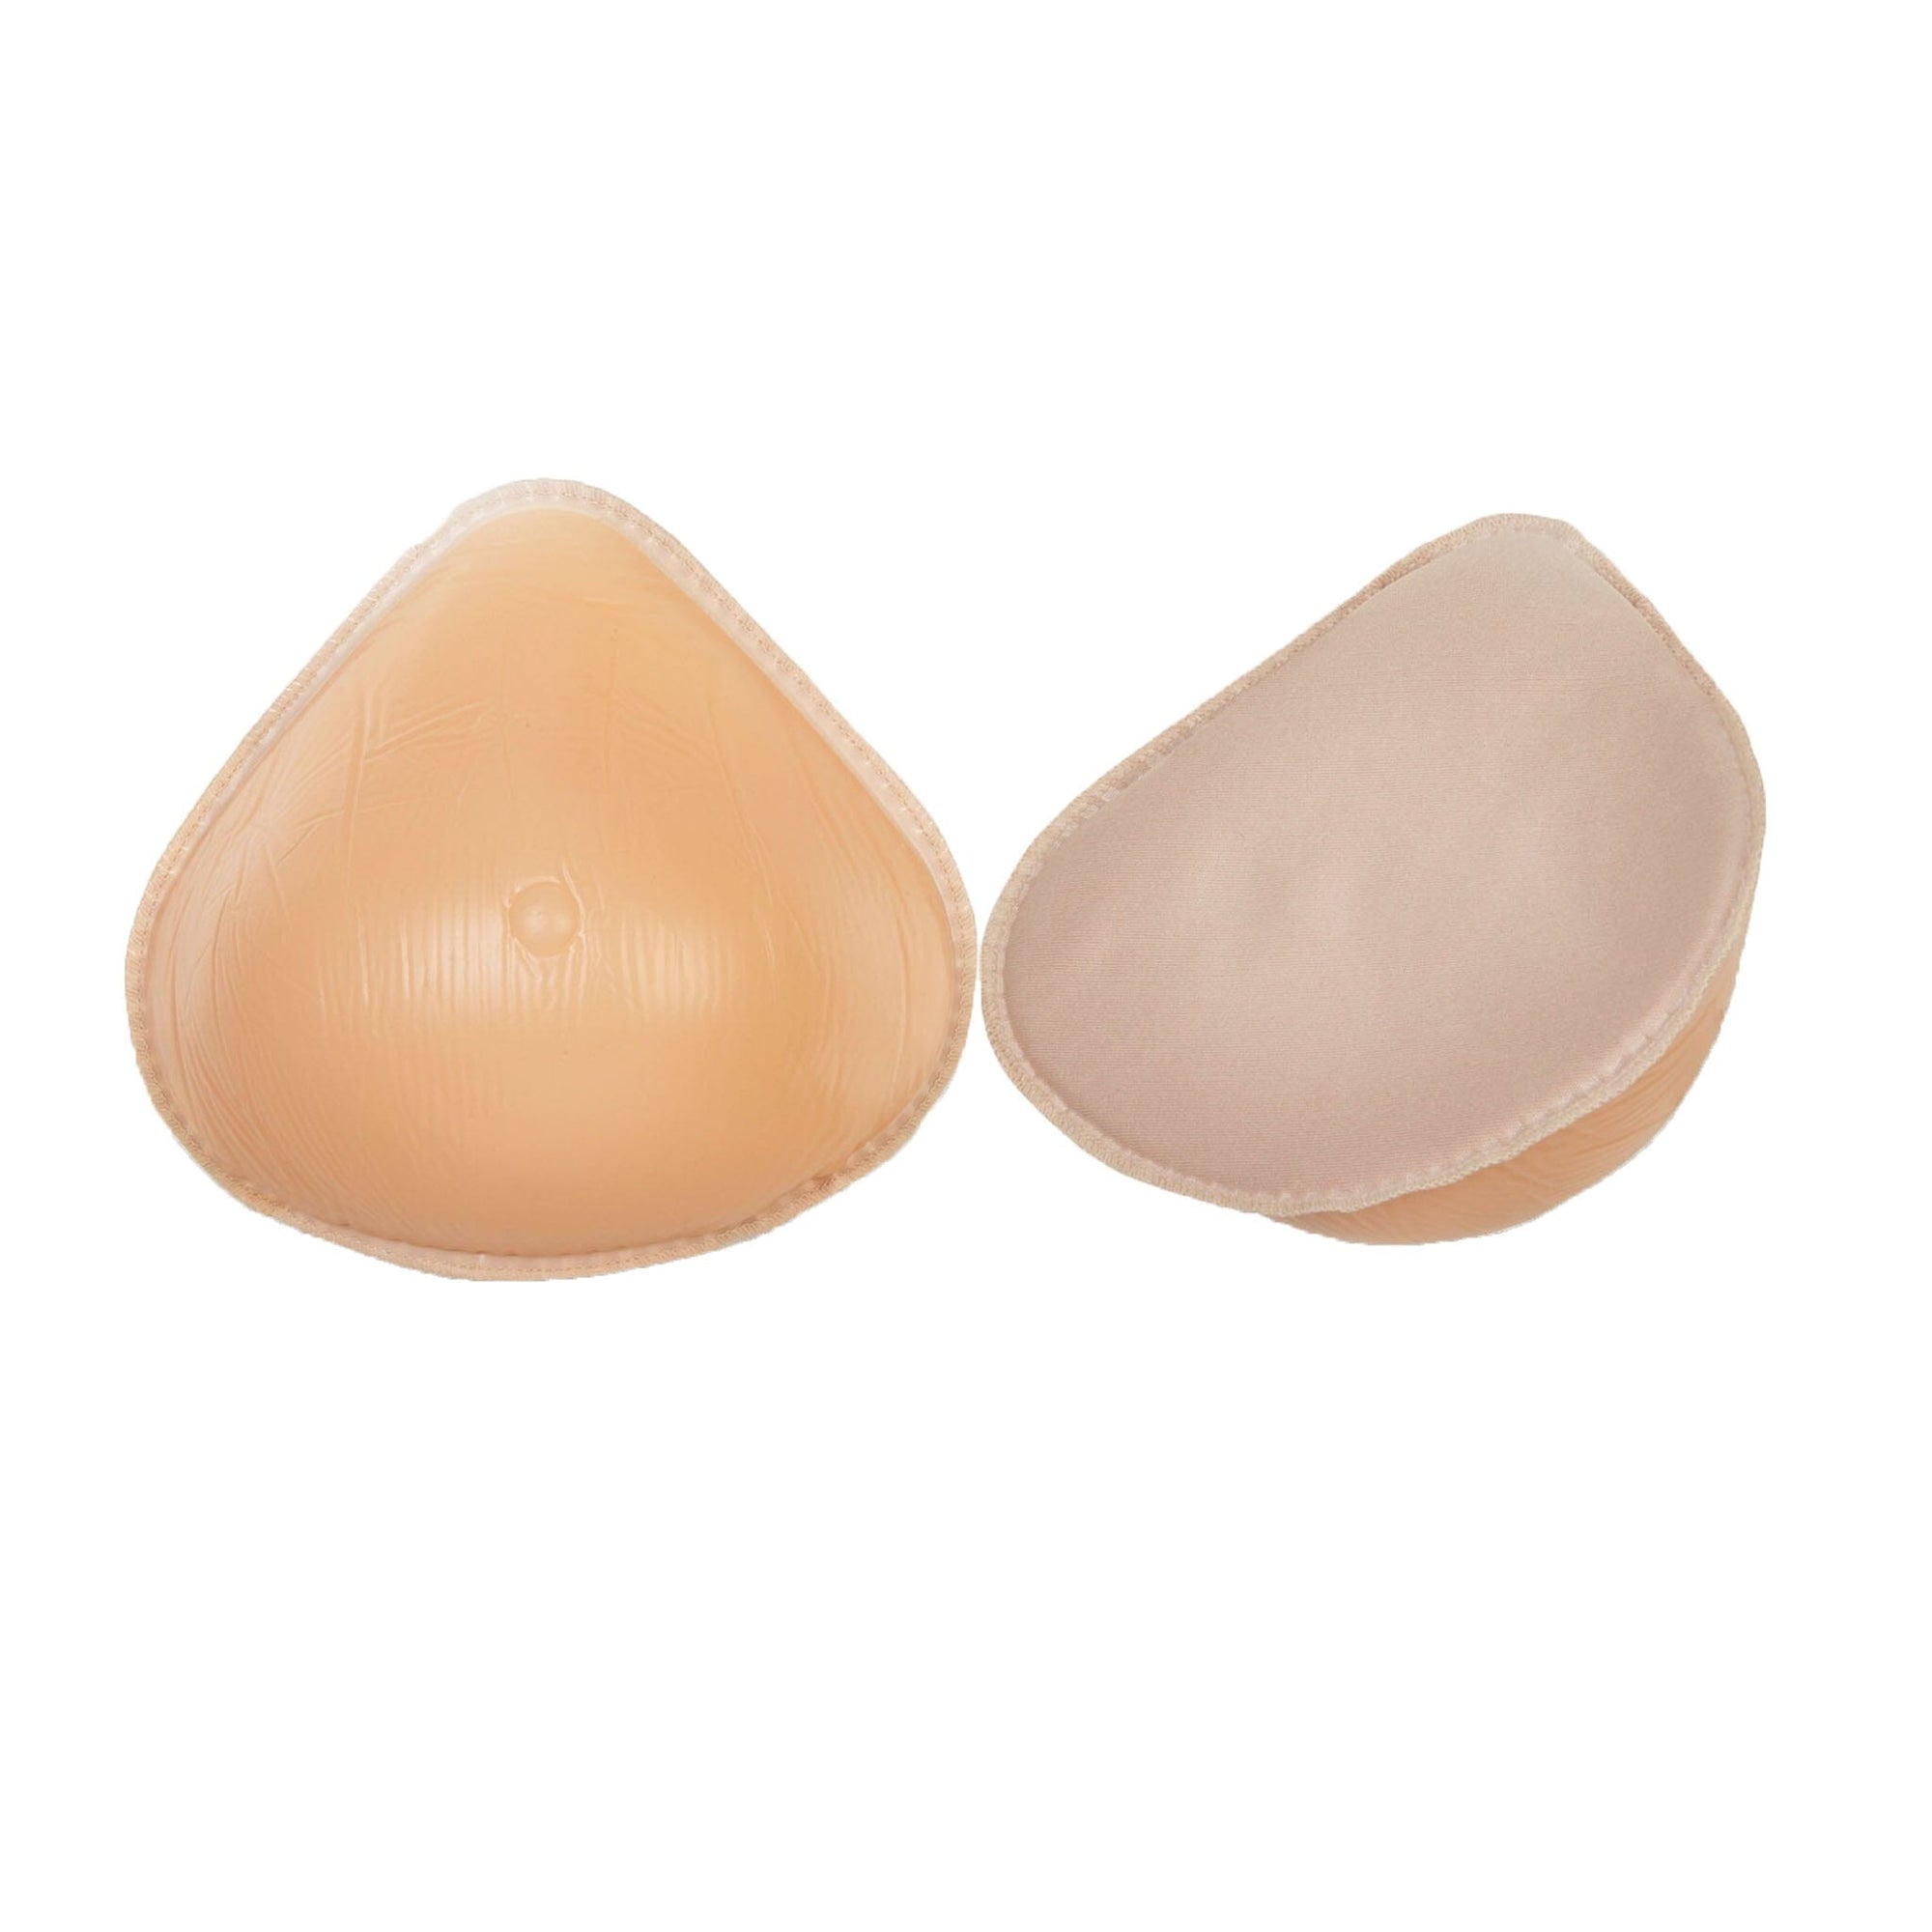 Silicone Breast Forms Protective Cover Soft Cotton Mastectomy